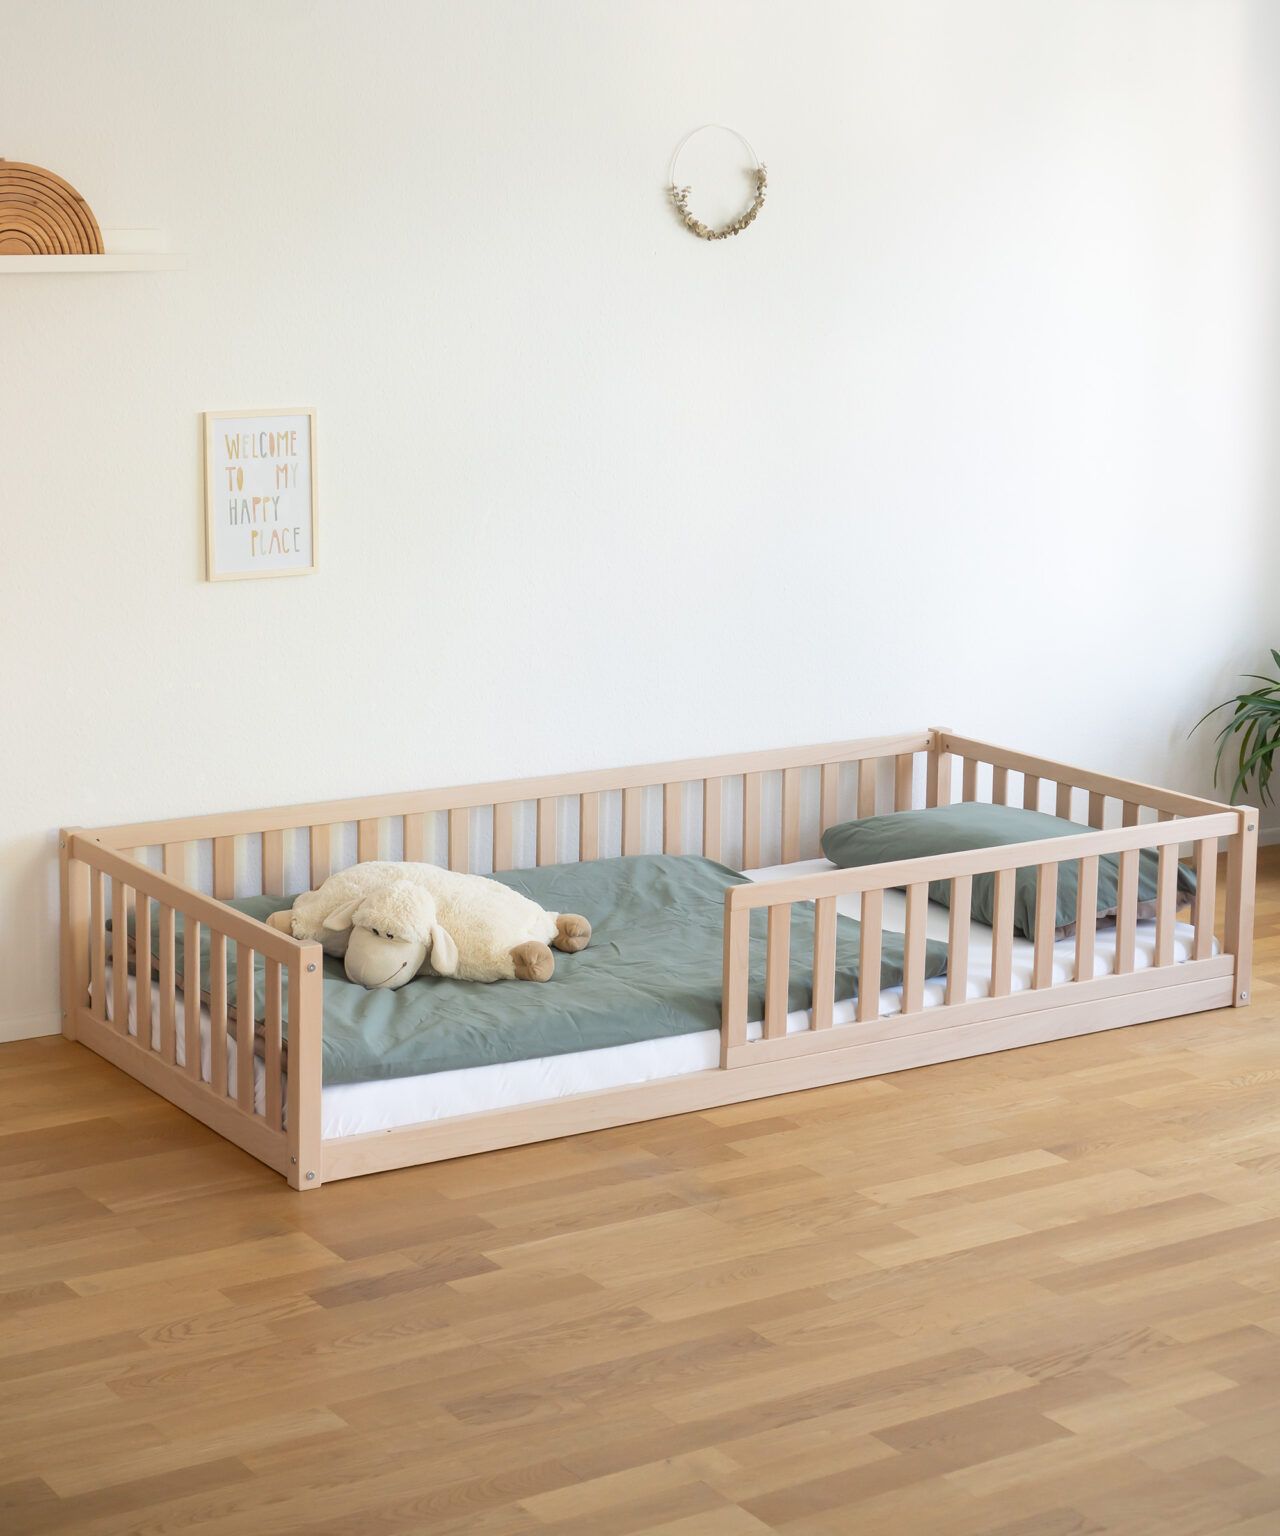 Adorable Toddler Bed Designs for Your Little One’s Room